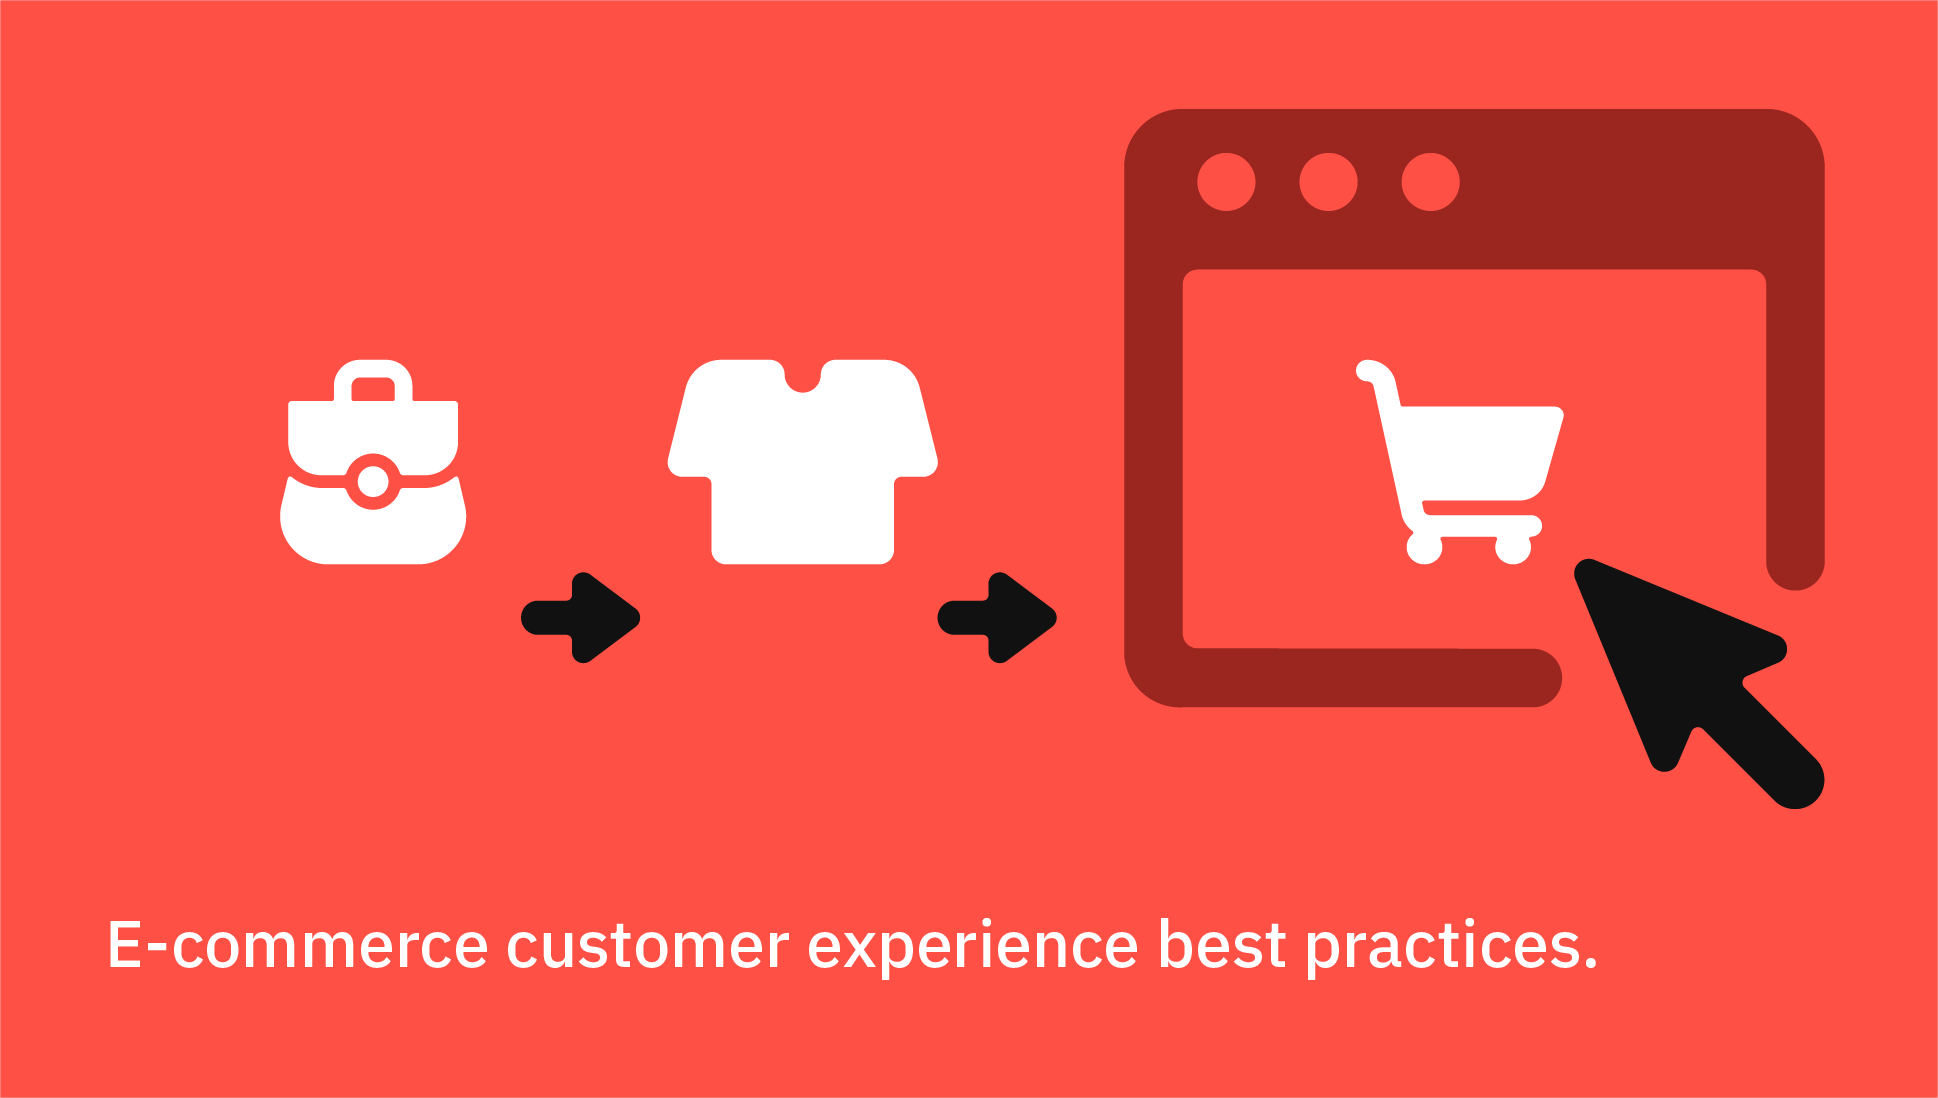 Infographic representing the e-commerce experience